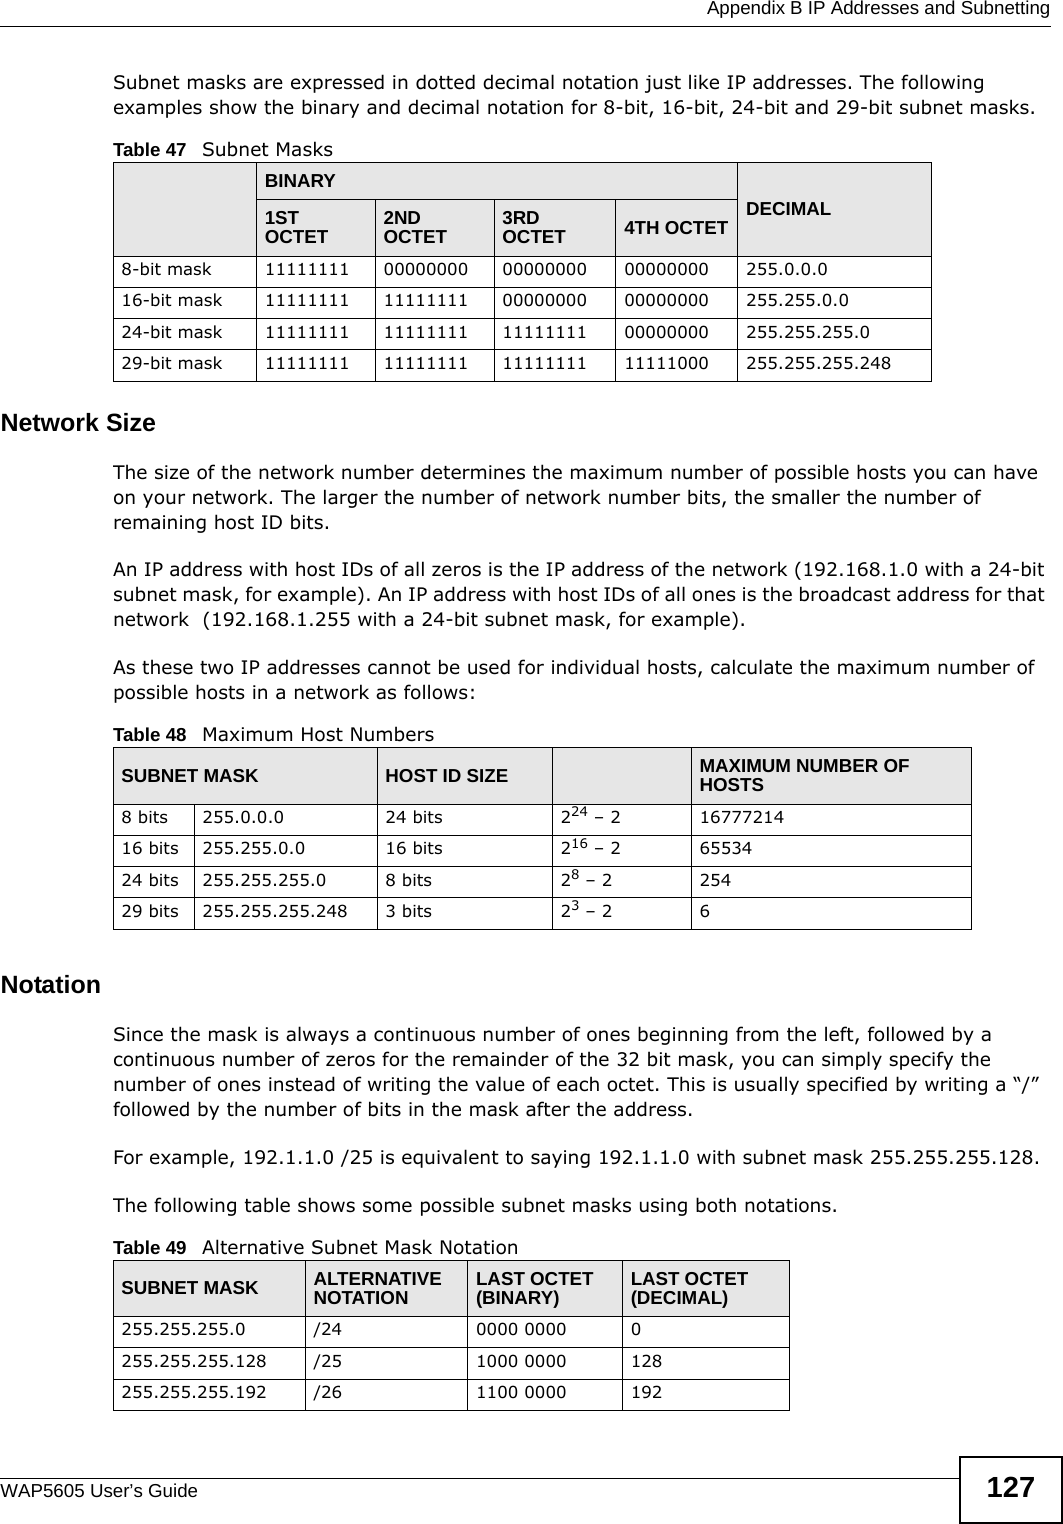  Appendix B IP Addresses and SubnettingWAP5605 User’s Guide 127Subnet masks are expressed in dotted decimal notation just like IP addresses. The following examples show the binary and decimal notation for 8-bit, 16-bit, 24-bit and 29-bit subnet masks. Network SizeThe size of the network number determines the maximum number of possible hosts you can have on your network. The larger the number of network number bits, the smaller the number of remaining host ID bits. An IP address with host IDs of all zeros is the IP address of the network (192.168.1.0 with a 24-bit subnet mask, for example). An IP address with host IDs of all ones is the broadcast address for that network  (192.168.1.255 with a 24-bit subnet mask, for example).As these two IP addresses cannot be used for individual hosts, calculate the maximum number of possible hosts in a network as follows:NotationSince the mask is always a continuous number of ones beginning from the left, followed by a continuous number of zeros for the remainder of the 32 bit mask, you can simply specify the number of ones instead of writing the value of each octet. This is usually specified by writing a “/” followed by the number of bits in the mask after the address. For example, 192.1.1.0 /25 is equivalent to saying 192.1.1.0 with subnet mask 255.255.255.128. The following table shows some possible subnet masks using both notations. Table 47   Subnet MasksBINARYDECIMAL1ST OCTET 2ND OCTET 3RD OCTET 4TH OCTET8-bit mask 11111111 00000000 00000000 00000000 255.0.0.016-bit mask 11111111 11111111 00000000 00000000 255.255.0.024-bit mask 11111111 11111111 11111111 00000000 255.255.255.029-bit mask 11111111 11111111 11111111 11111000 255.255.255.248Table 48   Maximum Host NumbersSUBNET MASK HOST ID SIZE MAXIMUM NUMBER OF HOSTS8 bits 255.0.0.0 24 bits 224 – 2 1677721416 bits 255.255.0.0 16 bits 216 – 2 6553424 bits 255.255.255.0 8 bits 28 – 2 25429 bits 255.255.255.248 3 bits 23 – 2 6Table 49   Alternative Subnet Mask NotationSUBNET MASK ALTERNATIVE NOTATION LAST OCTET (BINARY) LAST OCTET (DECIMAL)255.255.255.0 /24 0000 0000 0255.255.255.128 /25 1000 0000 128255.255.255.192 /26 1100 0000 192